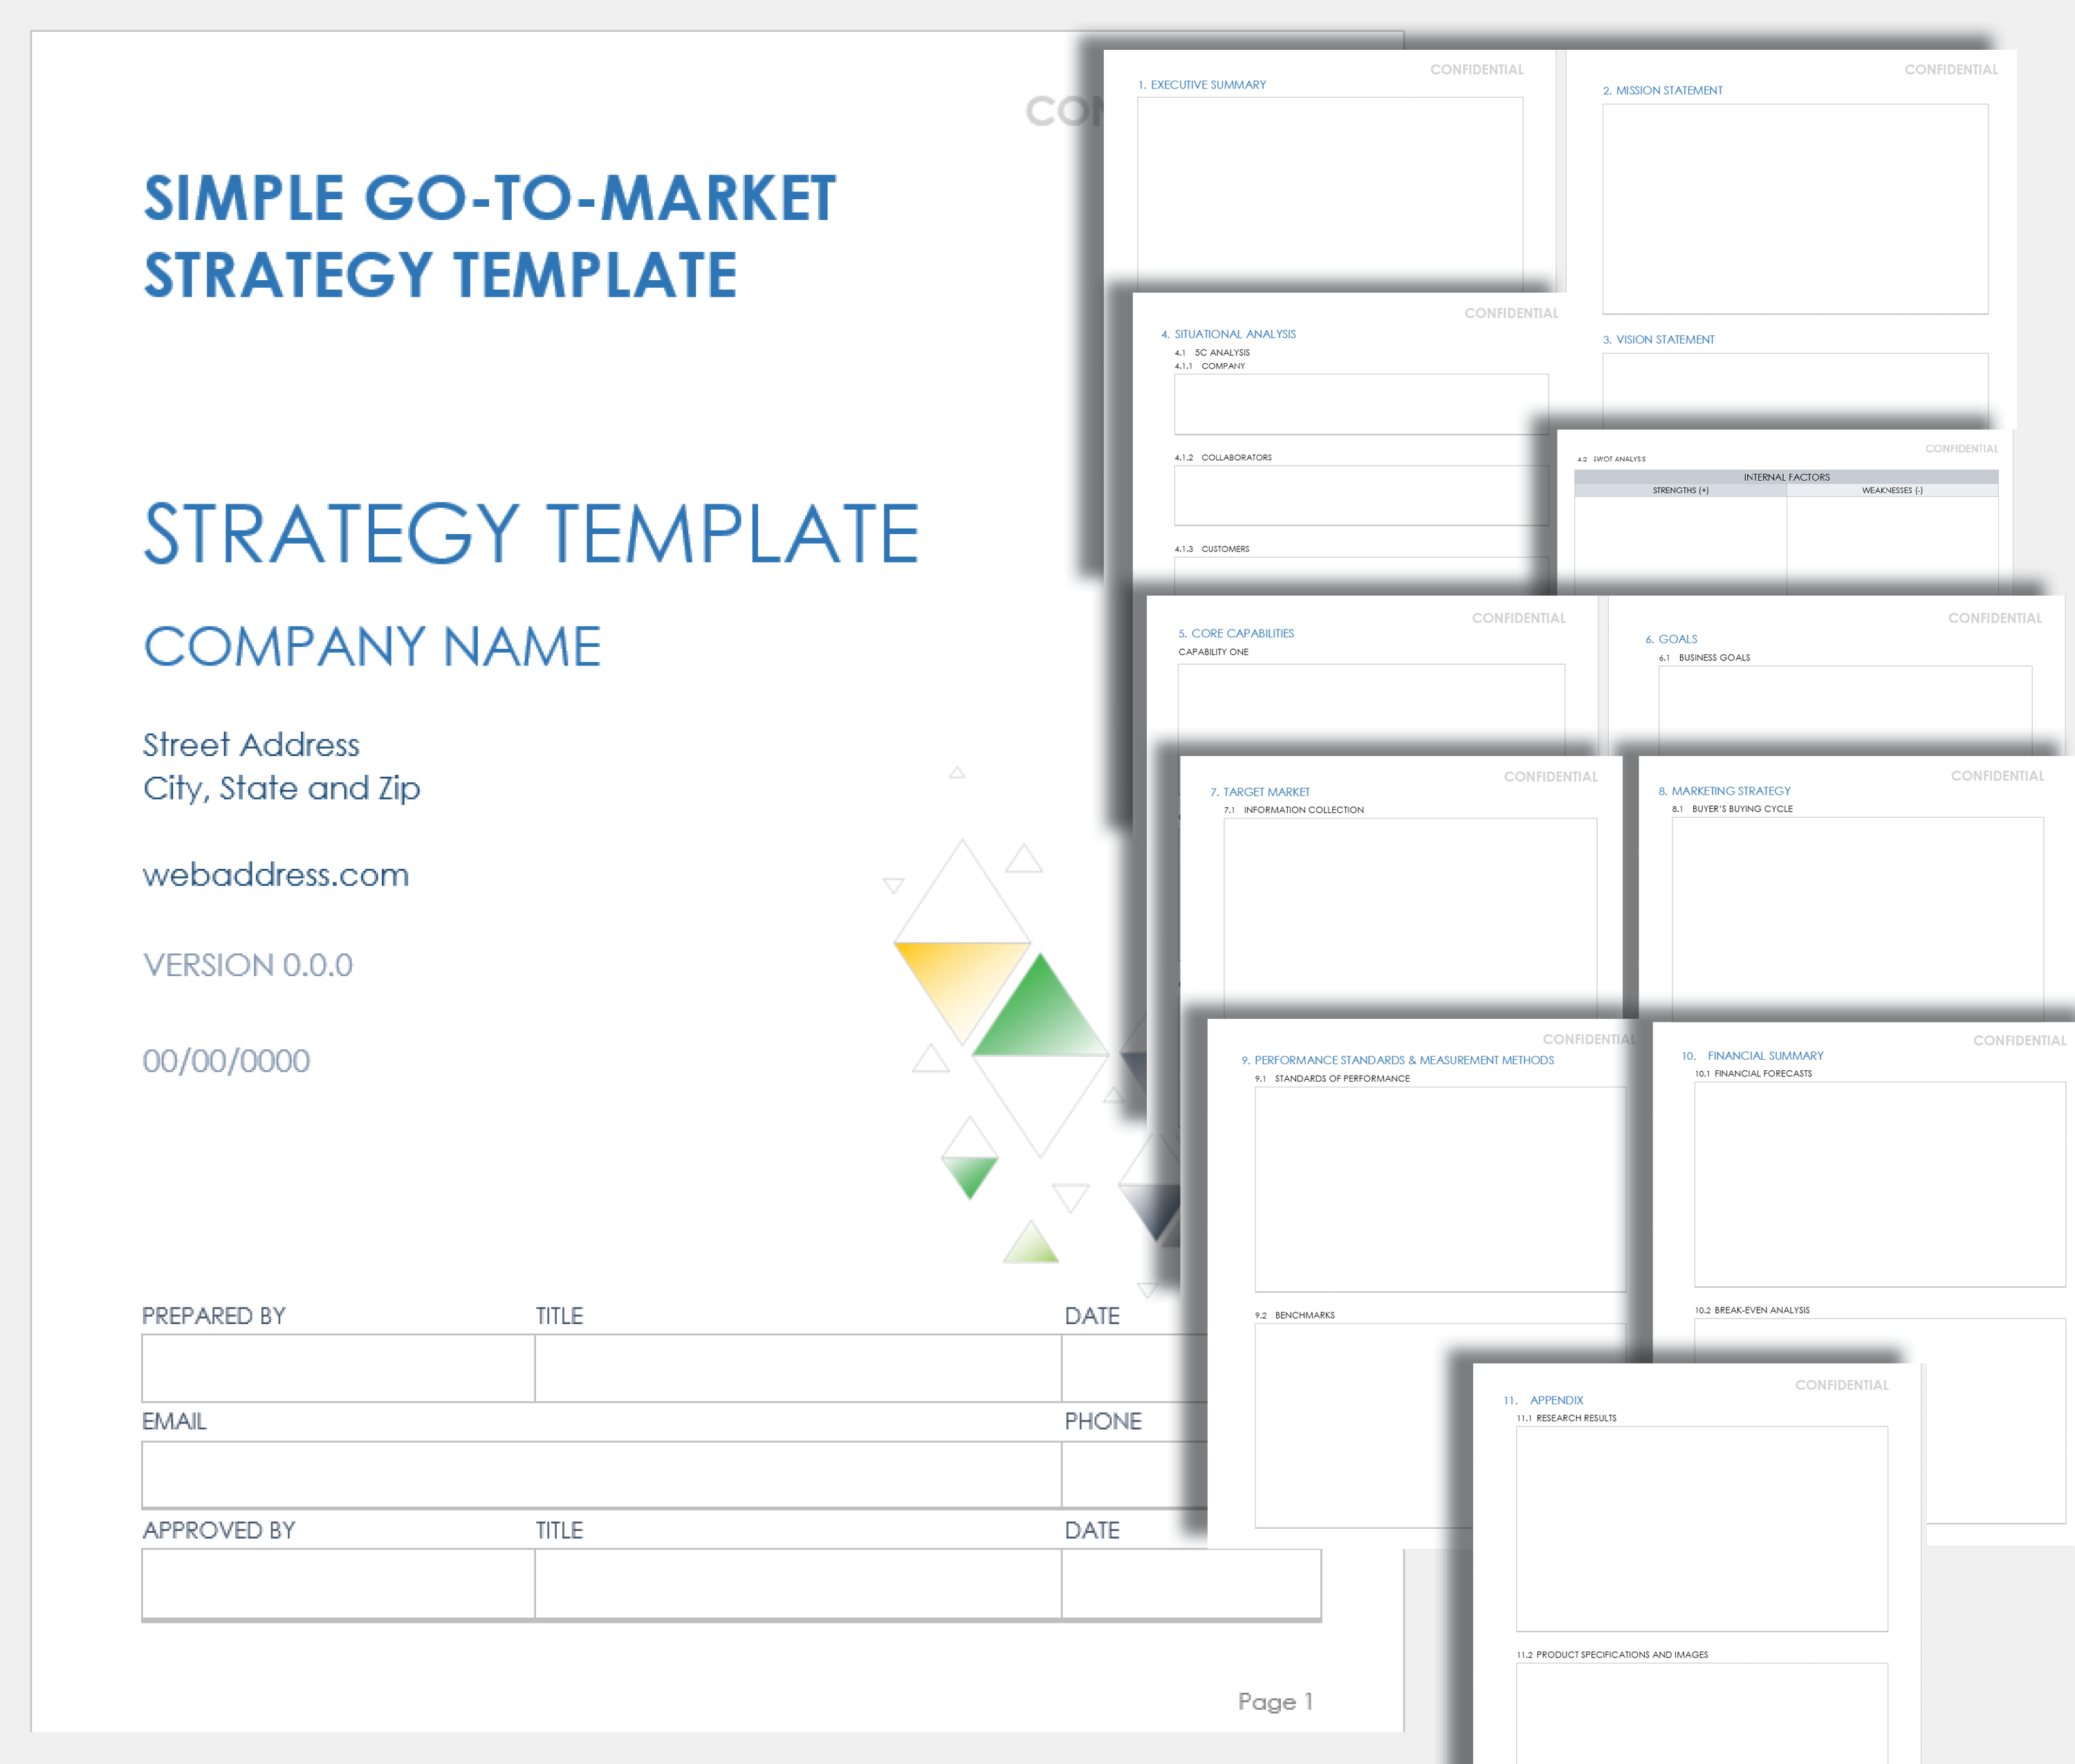 Simple Go-to-Market Strategy Template